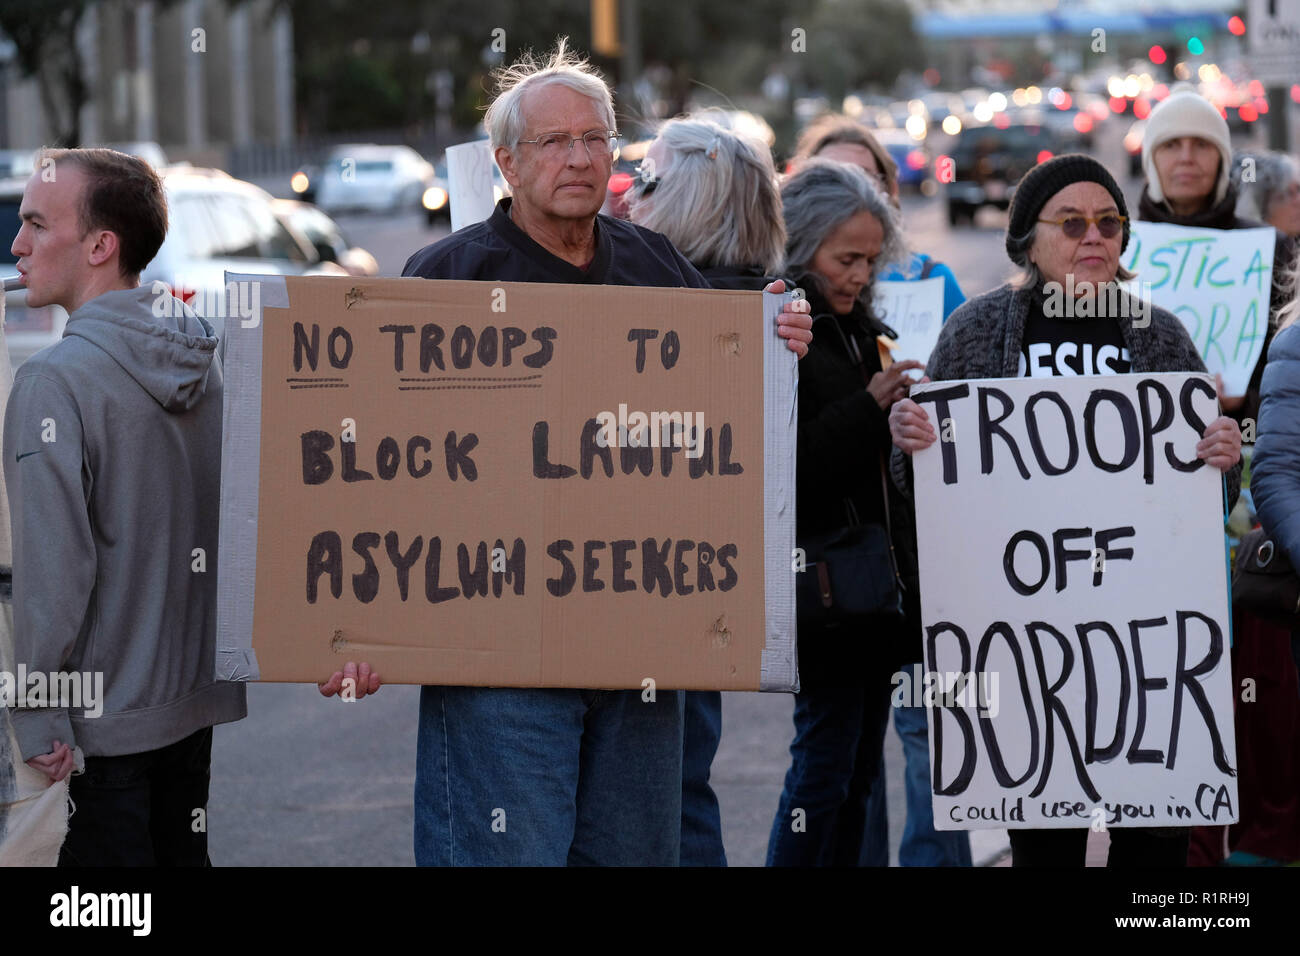 Tucson, Arizona, USA. 13th Nov, 2018. Pro immigrants rights protest in Tucson in support of the migrant caravan traveling through Mexico towards the US border. They denounced the stationing of US troops by President Trump on the border to hault the caravan if they reach the Arizona and support the migrants rights to apply for asylum. Credit: Christopher Brown/ZUMA Wire/Alamy Live News Stock Photo